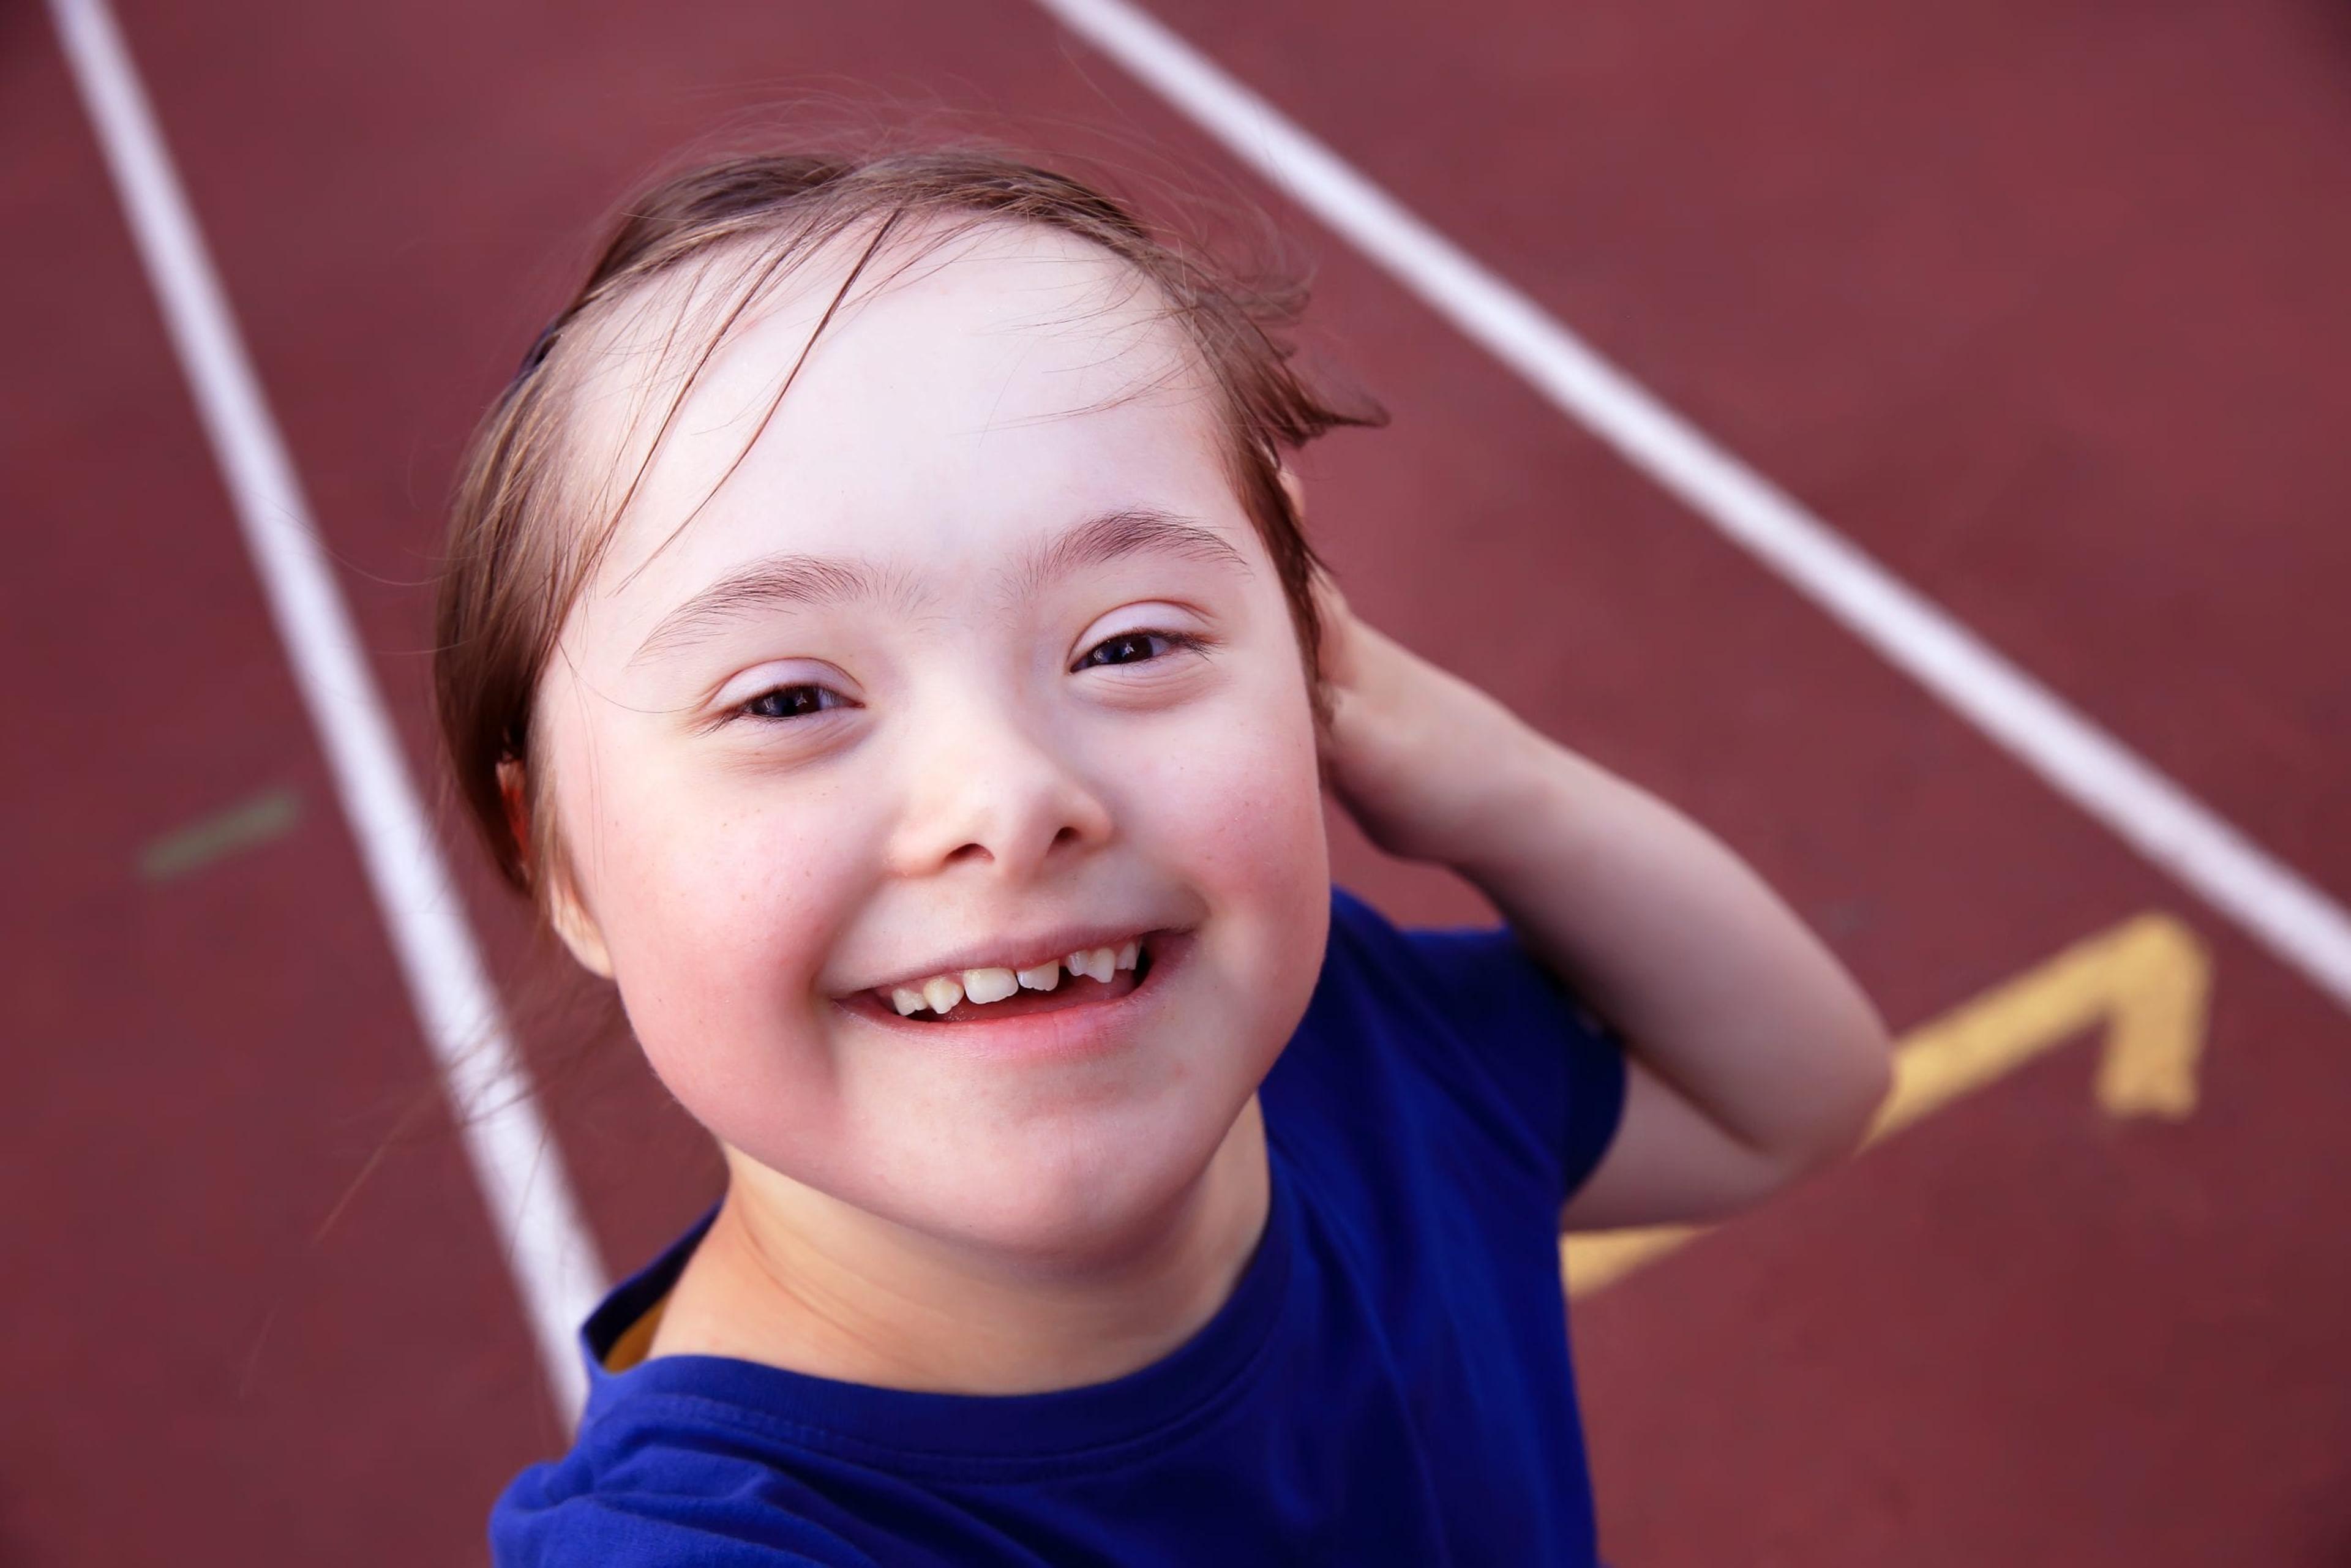 Little girl with Down's syndrome on the track.